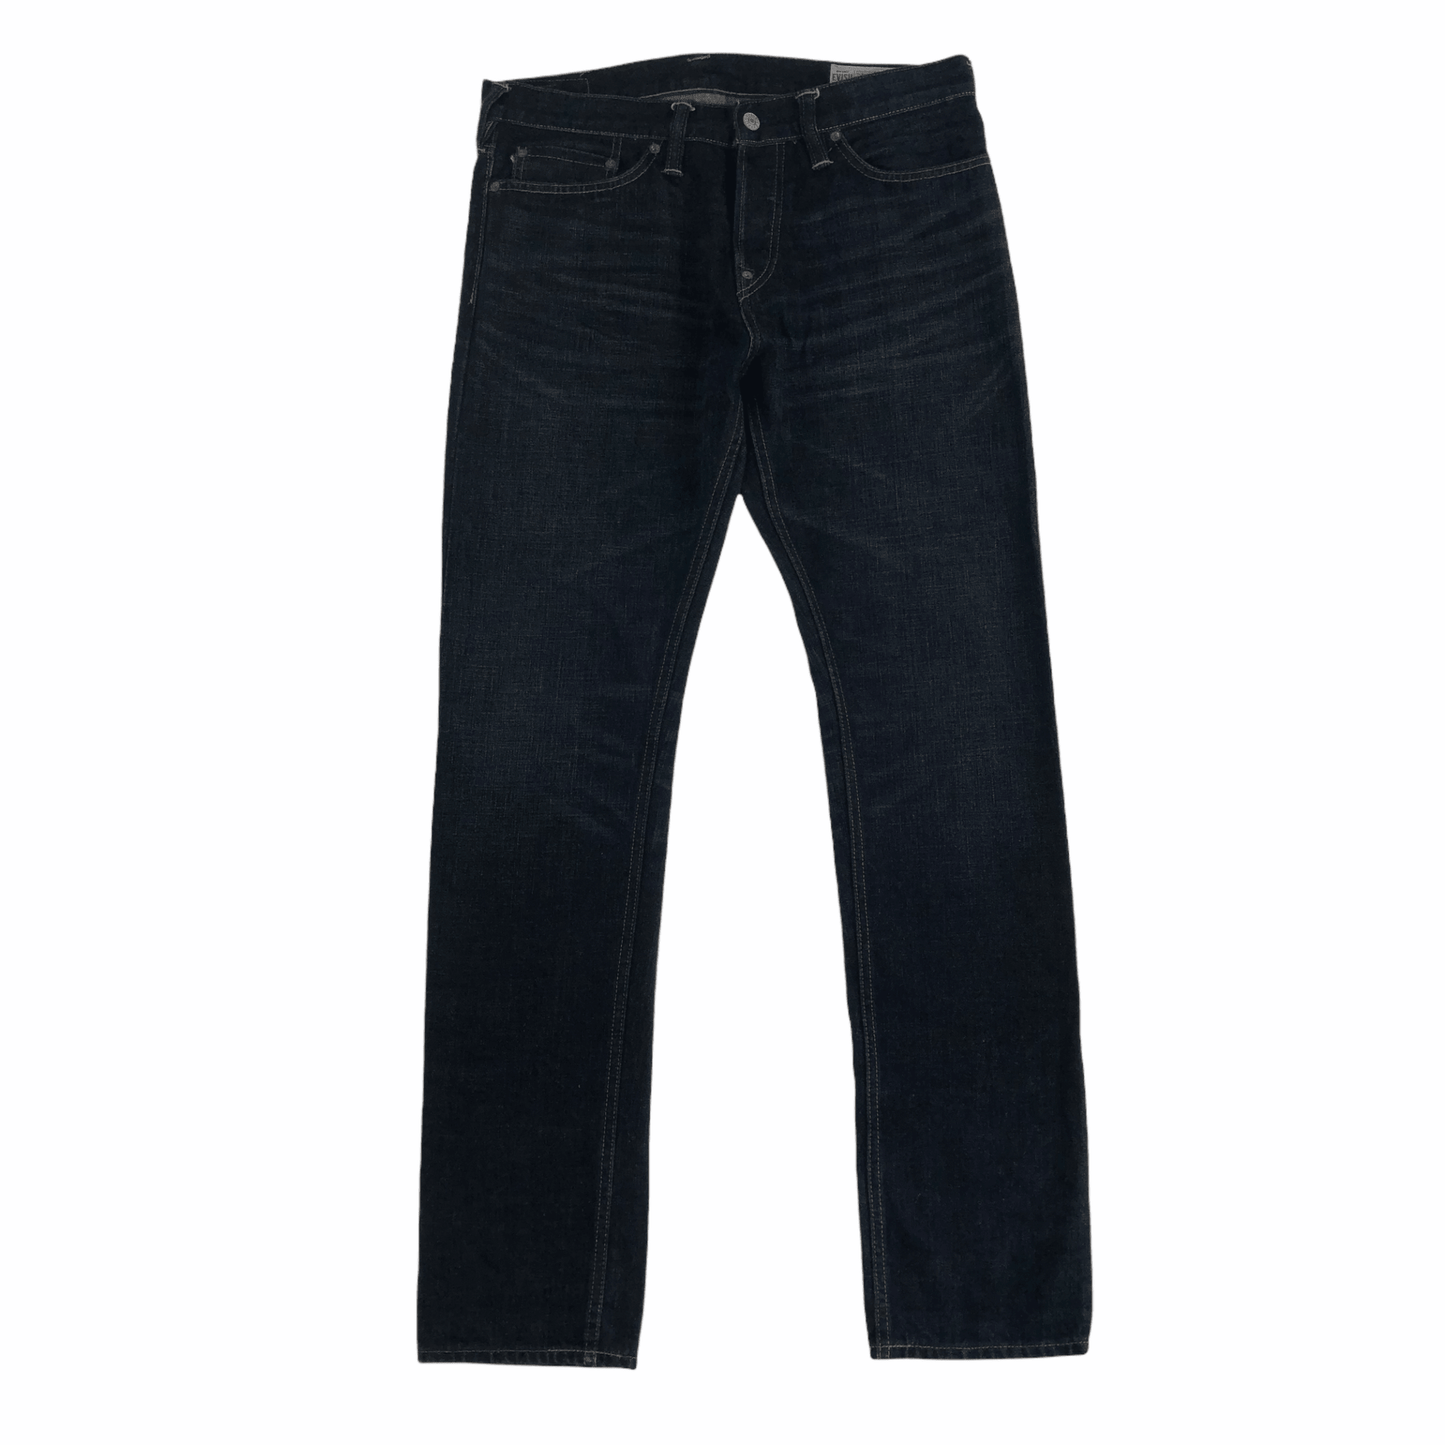 Evisu double gull Japanese selvedge denim jeans trousers W31 - Known Source